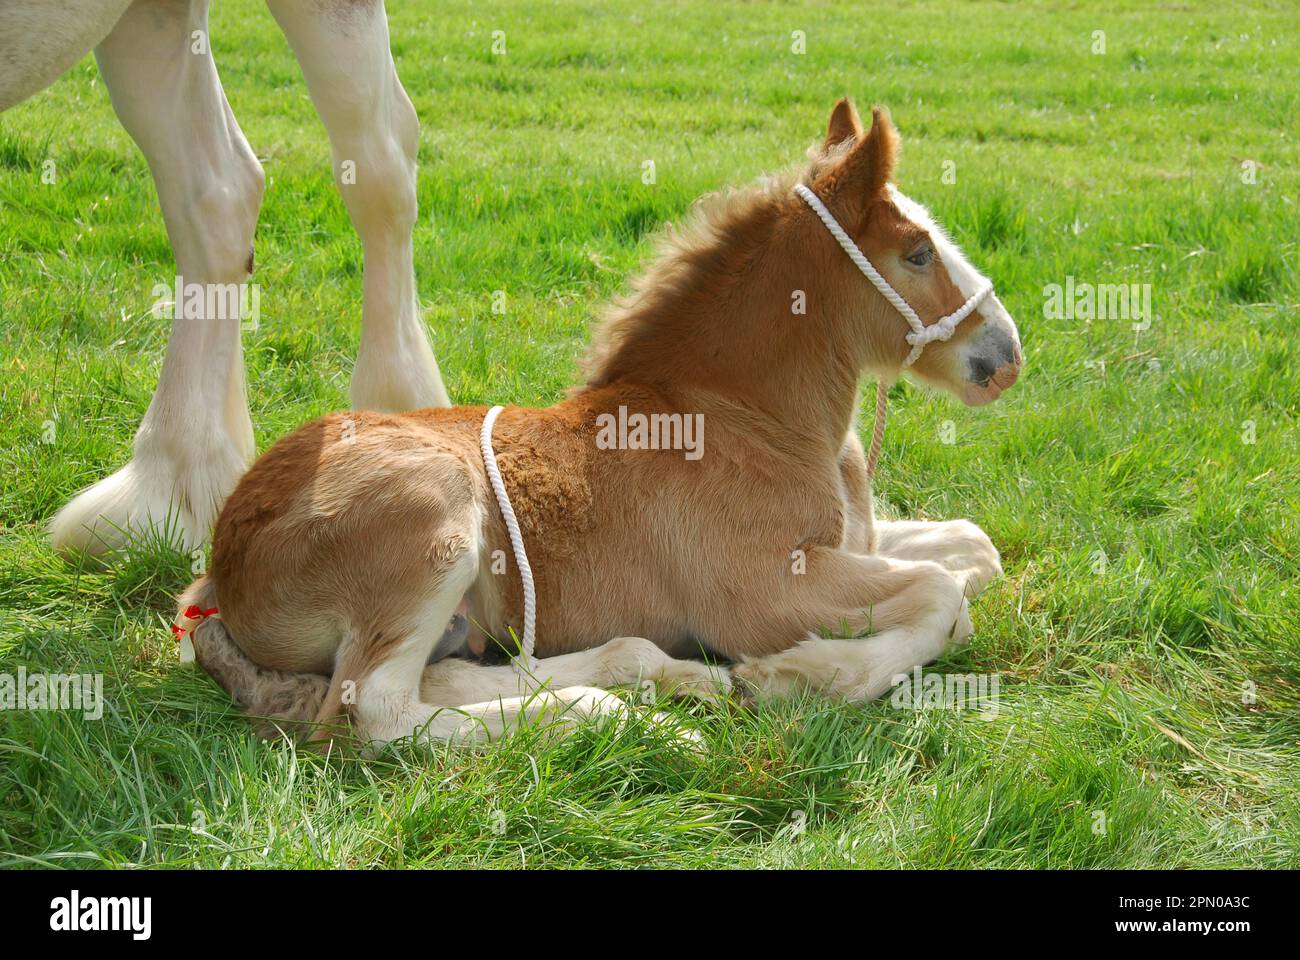 Clydesdale horse, foal, lying in the grass, Ayr Show, Ayrshire, Scotland, Great Britain Stock Photo